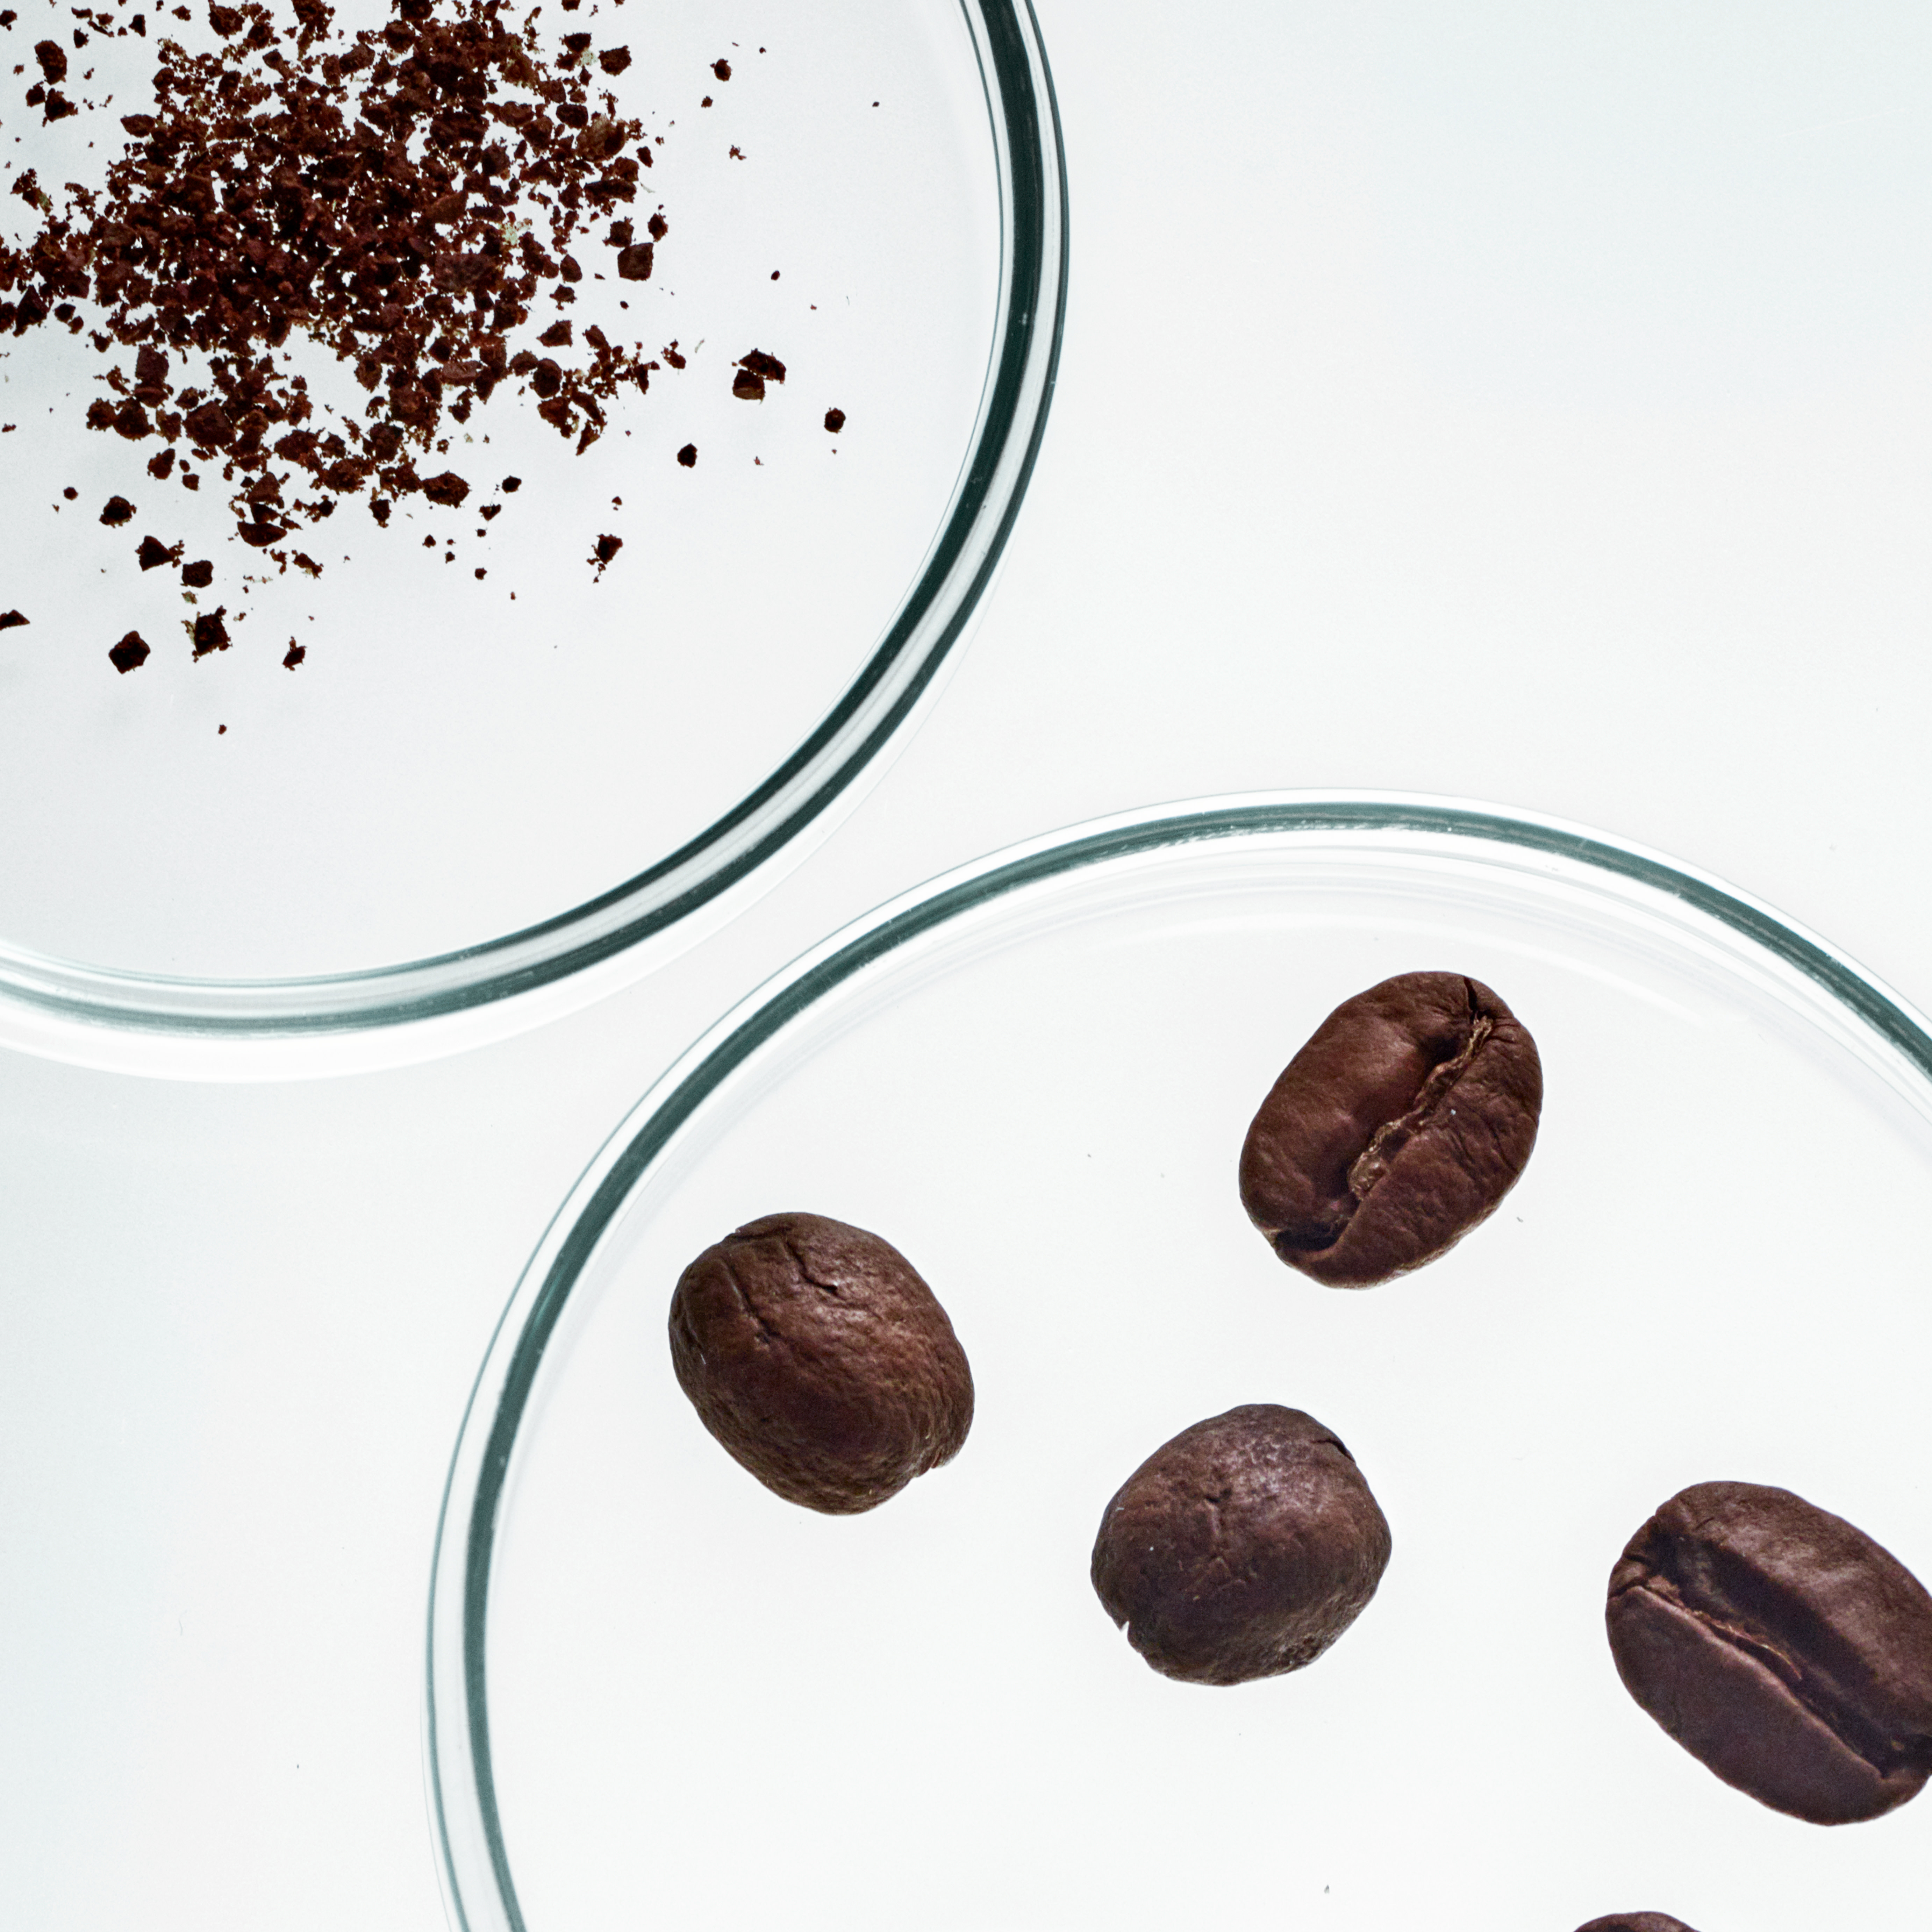 Banner with coffee beans in a petri dish and ground coffee in a petri dish next to them.